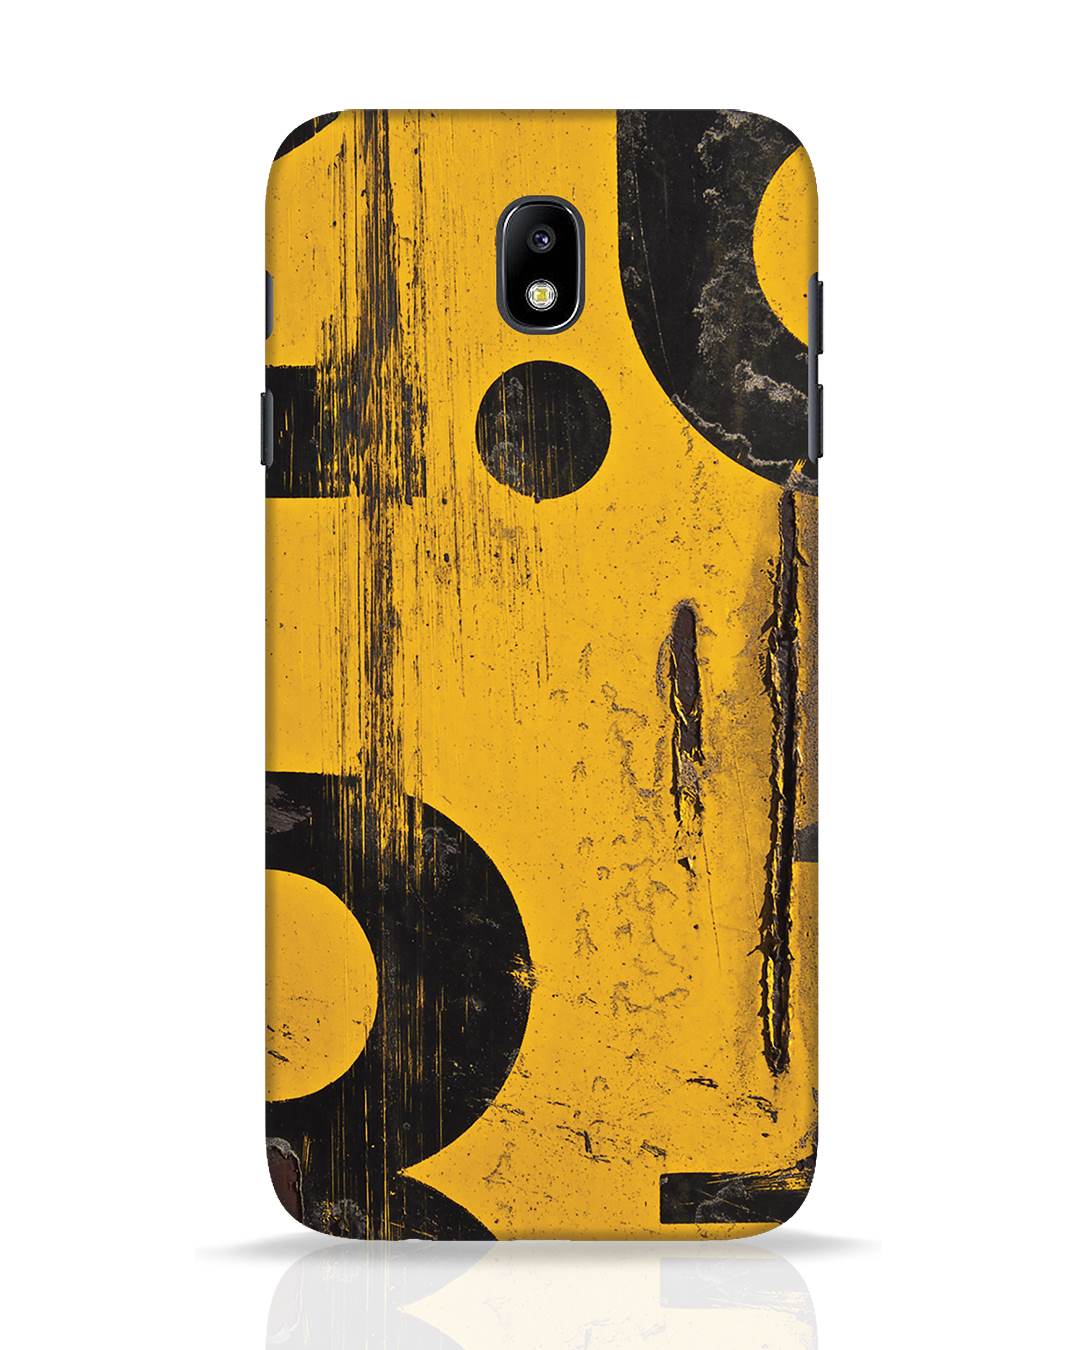 Digit Samsung Galaxy J7 Pro Mobile Cover Samsung Galaxy J7 Pro Mobile Covers Bewakoof.com